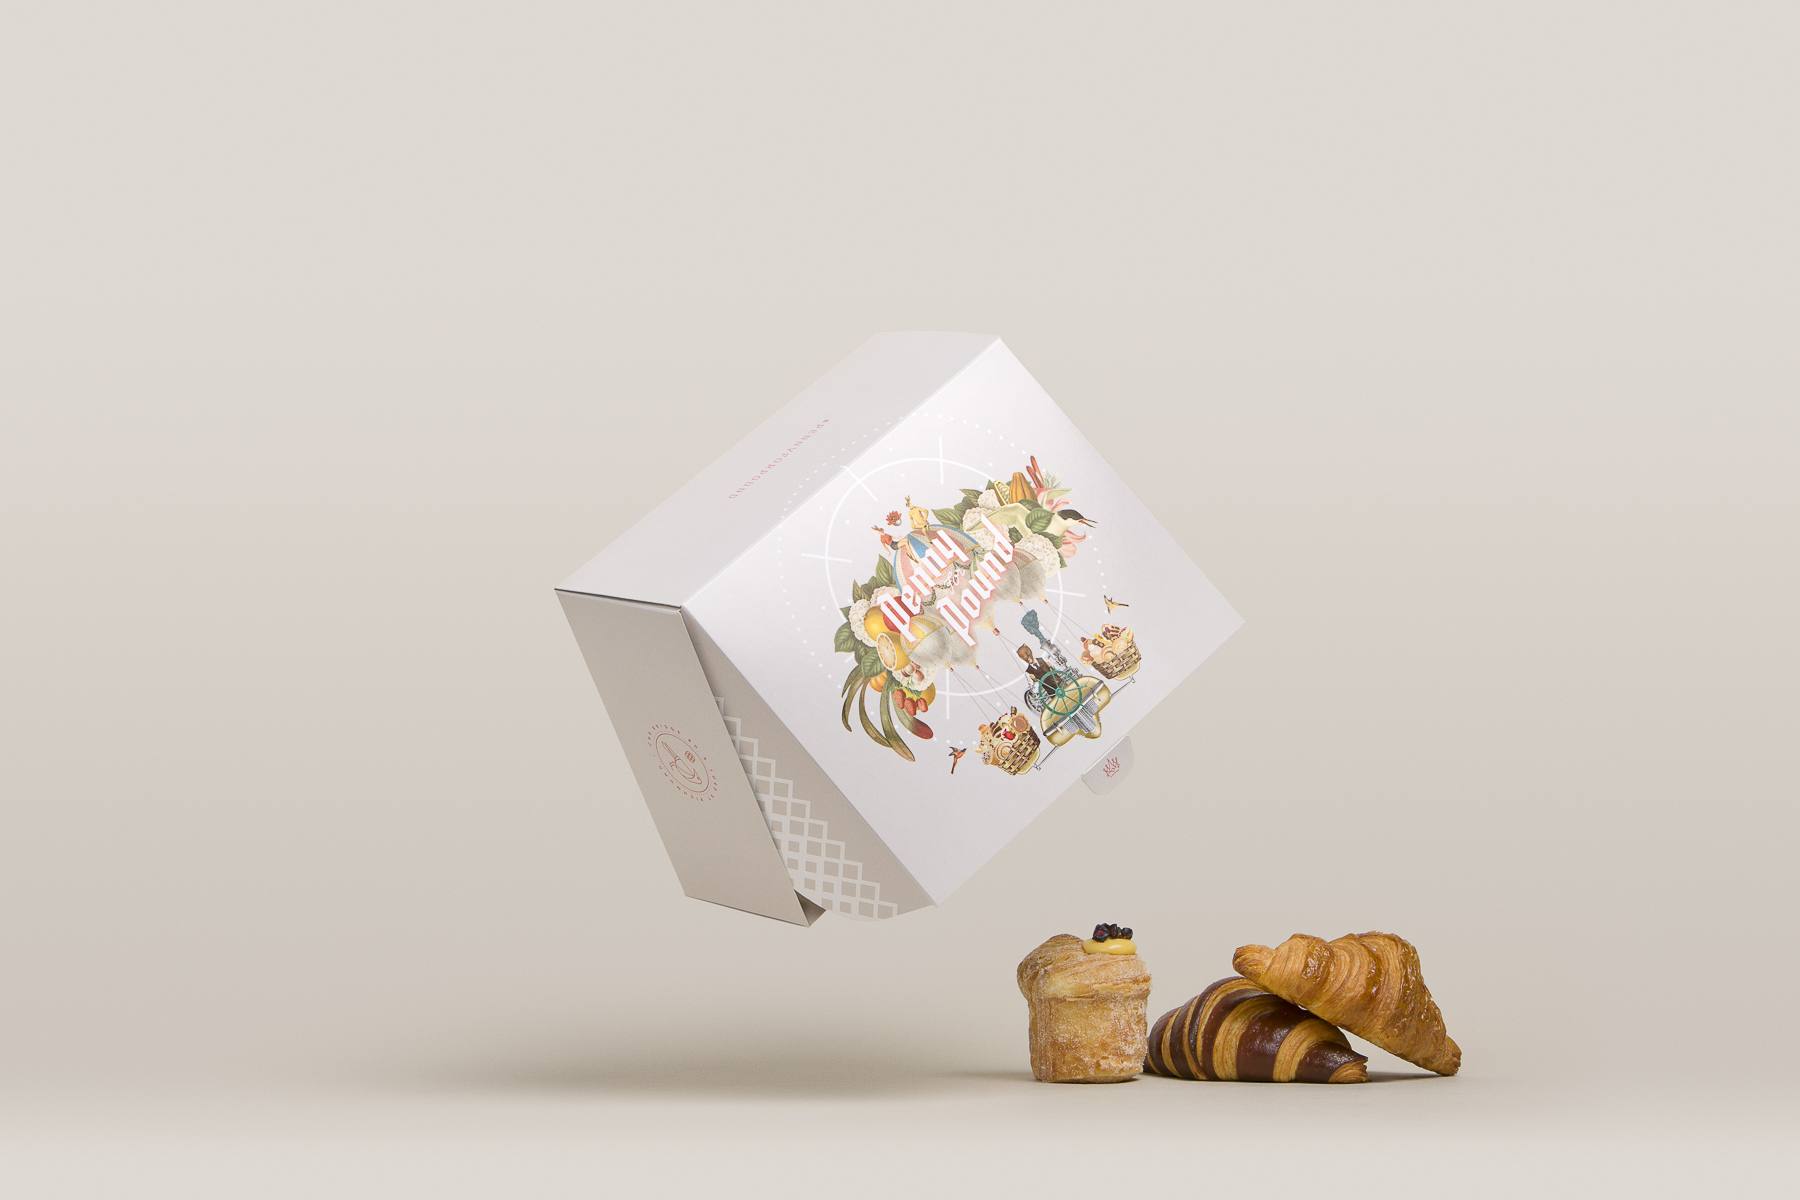 Pastry box packaging designed for Penny for Pound